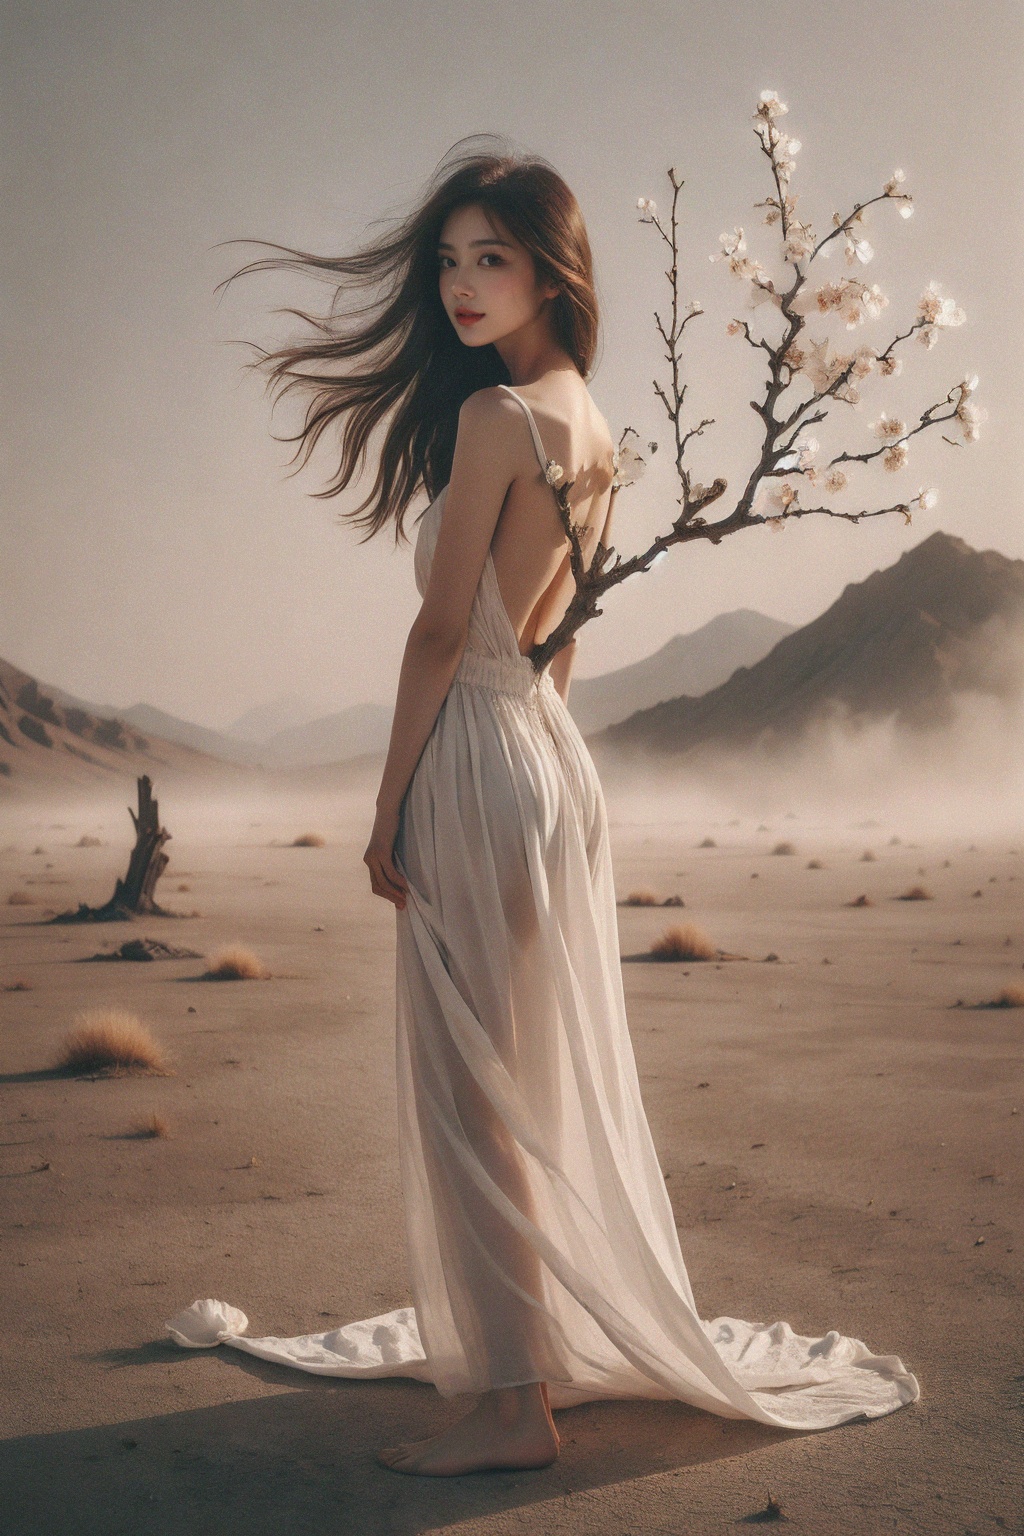 1girl,<lora:枯枝1:1>,This picture depicts a surrealistic image of a woman blending with natural elements. A woman stands in a desolate scene,her back and hair gradually turning into branches and twigs of a tree. A few flowers bloomed on the branch,as if she were a tree growing flowers. She was wearing a flowing white long skirt,with the hem spread out on the ground,interweaving with the lines of the tree roots. This woman's posture is sideways facing backwards,facing the mist in the distance,as if she is gazing or contemplating. The color contrast,light and shadow processing,and theme conception in this picture are all very captivating,creating a feeling of combining fantasy and reality. Overall,images convey an artistic concept that combines natural and human forms,full of symbolic meaning and inner emotional expression.,smile,